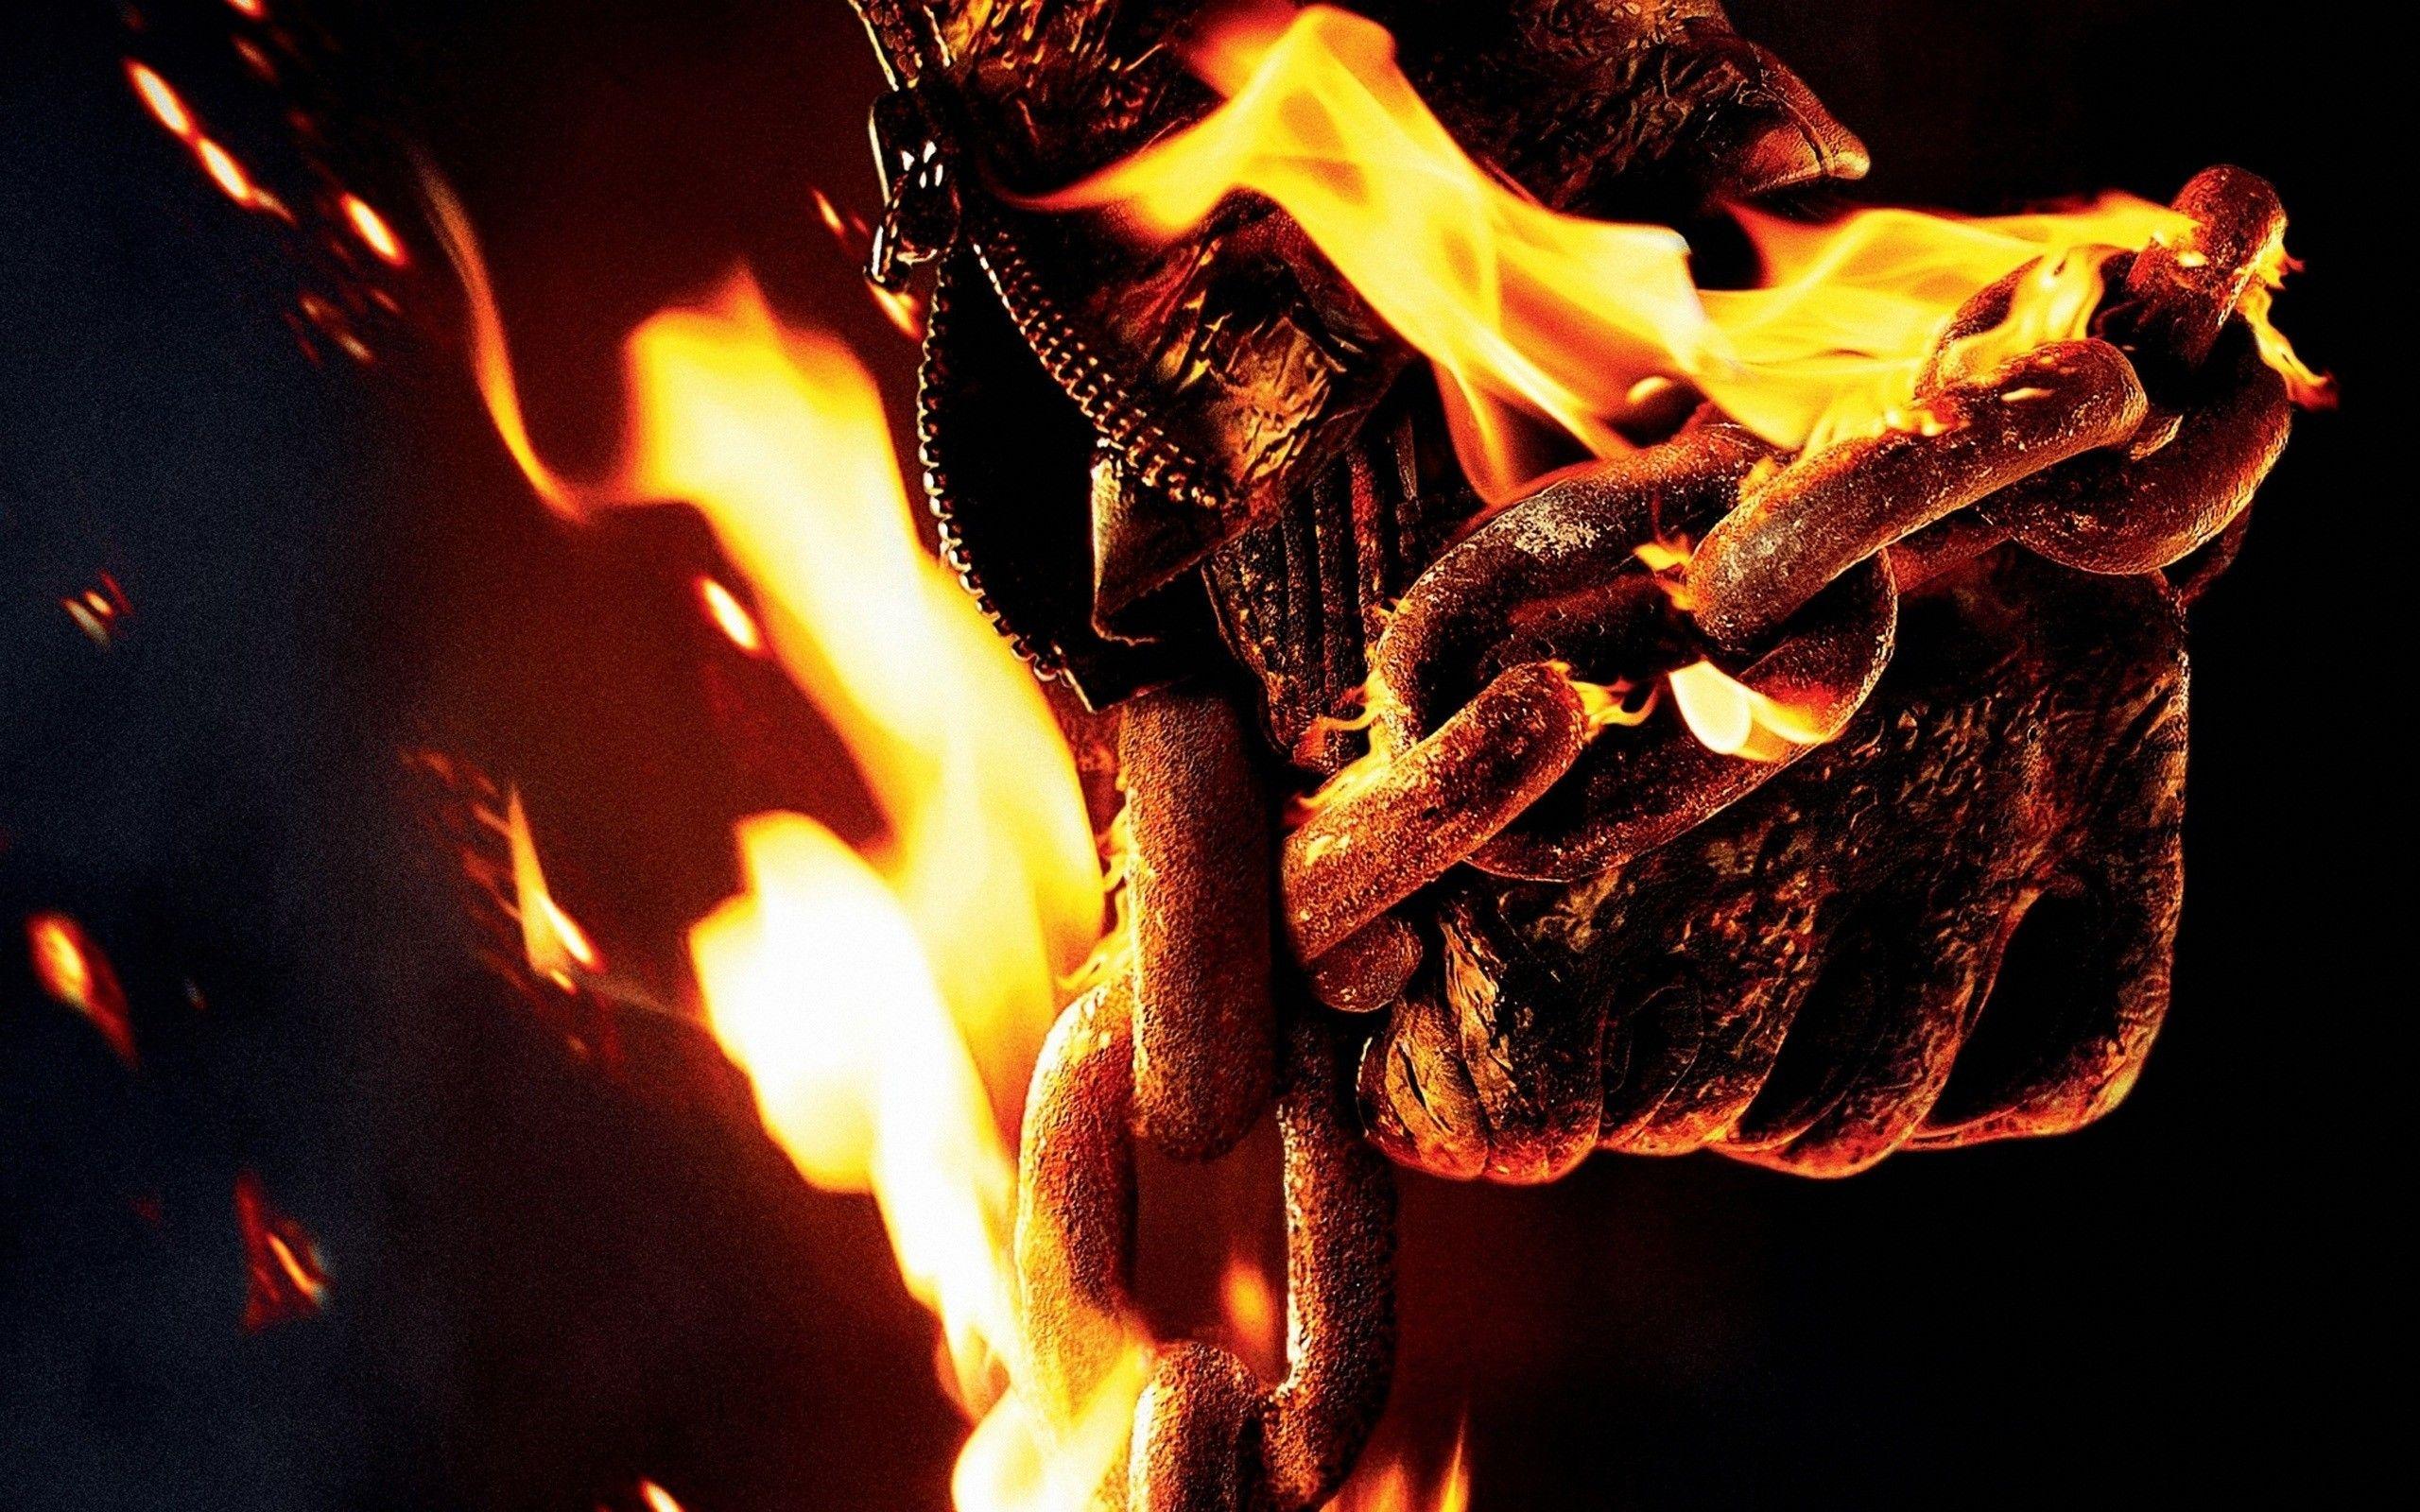 Download the Ghost Rider 2 Wallpaper, Ghost Rider 2 iPhone Wallpaper